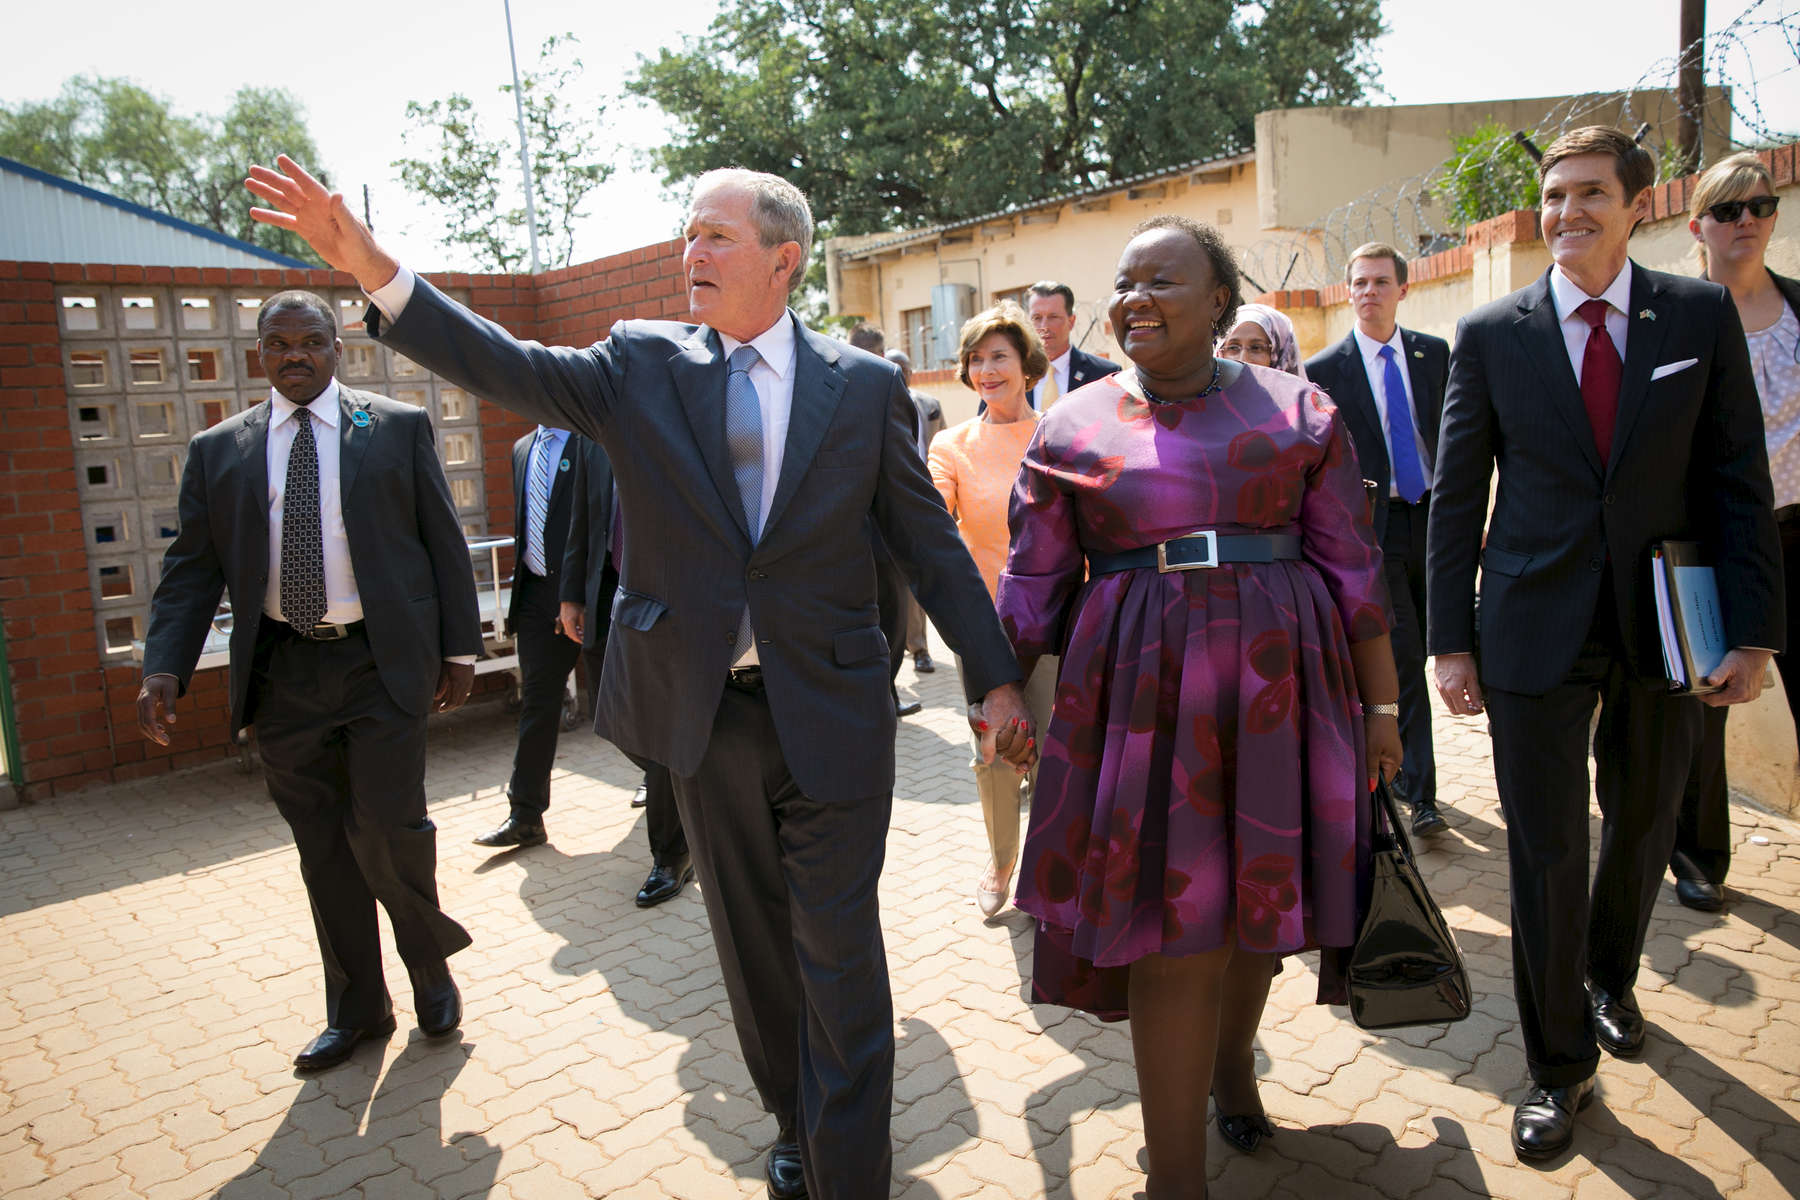 President and Mrs. Bush in Africa on April 4, 2017. Photo by Paul Morse